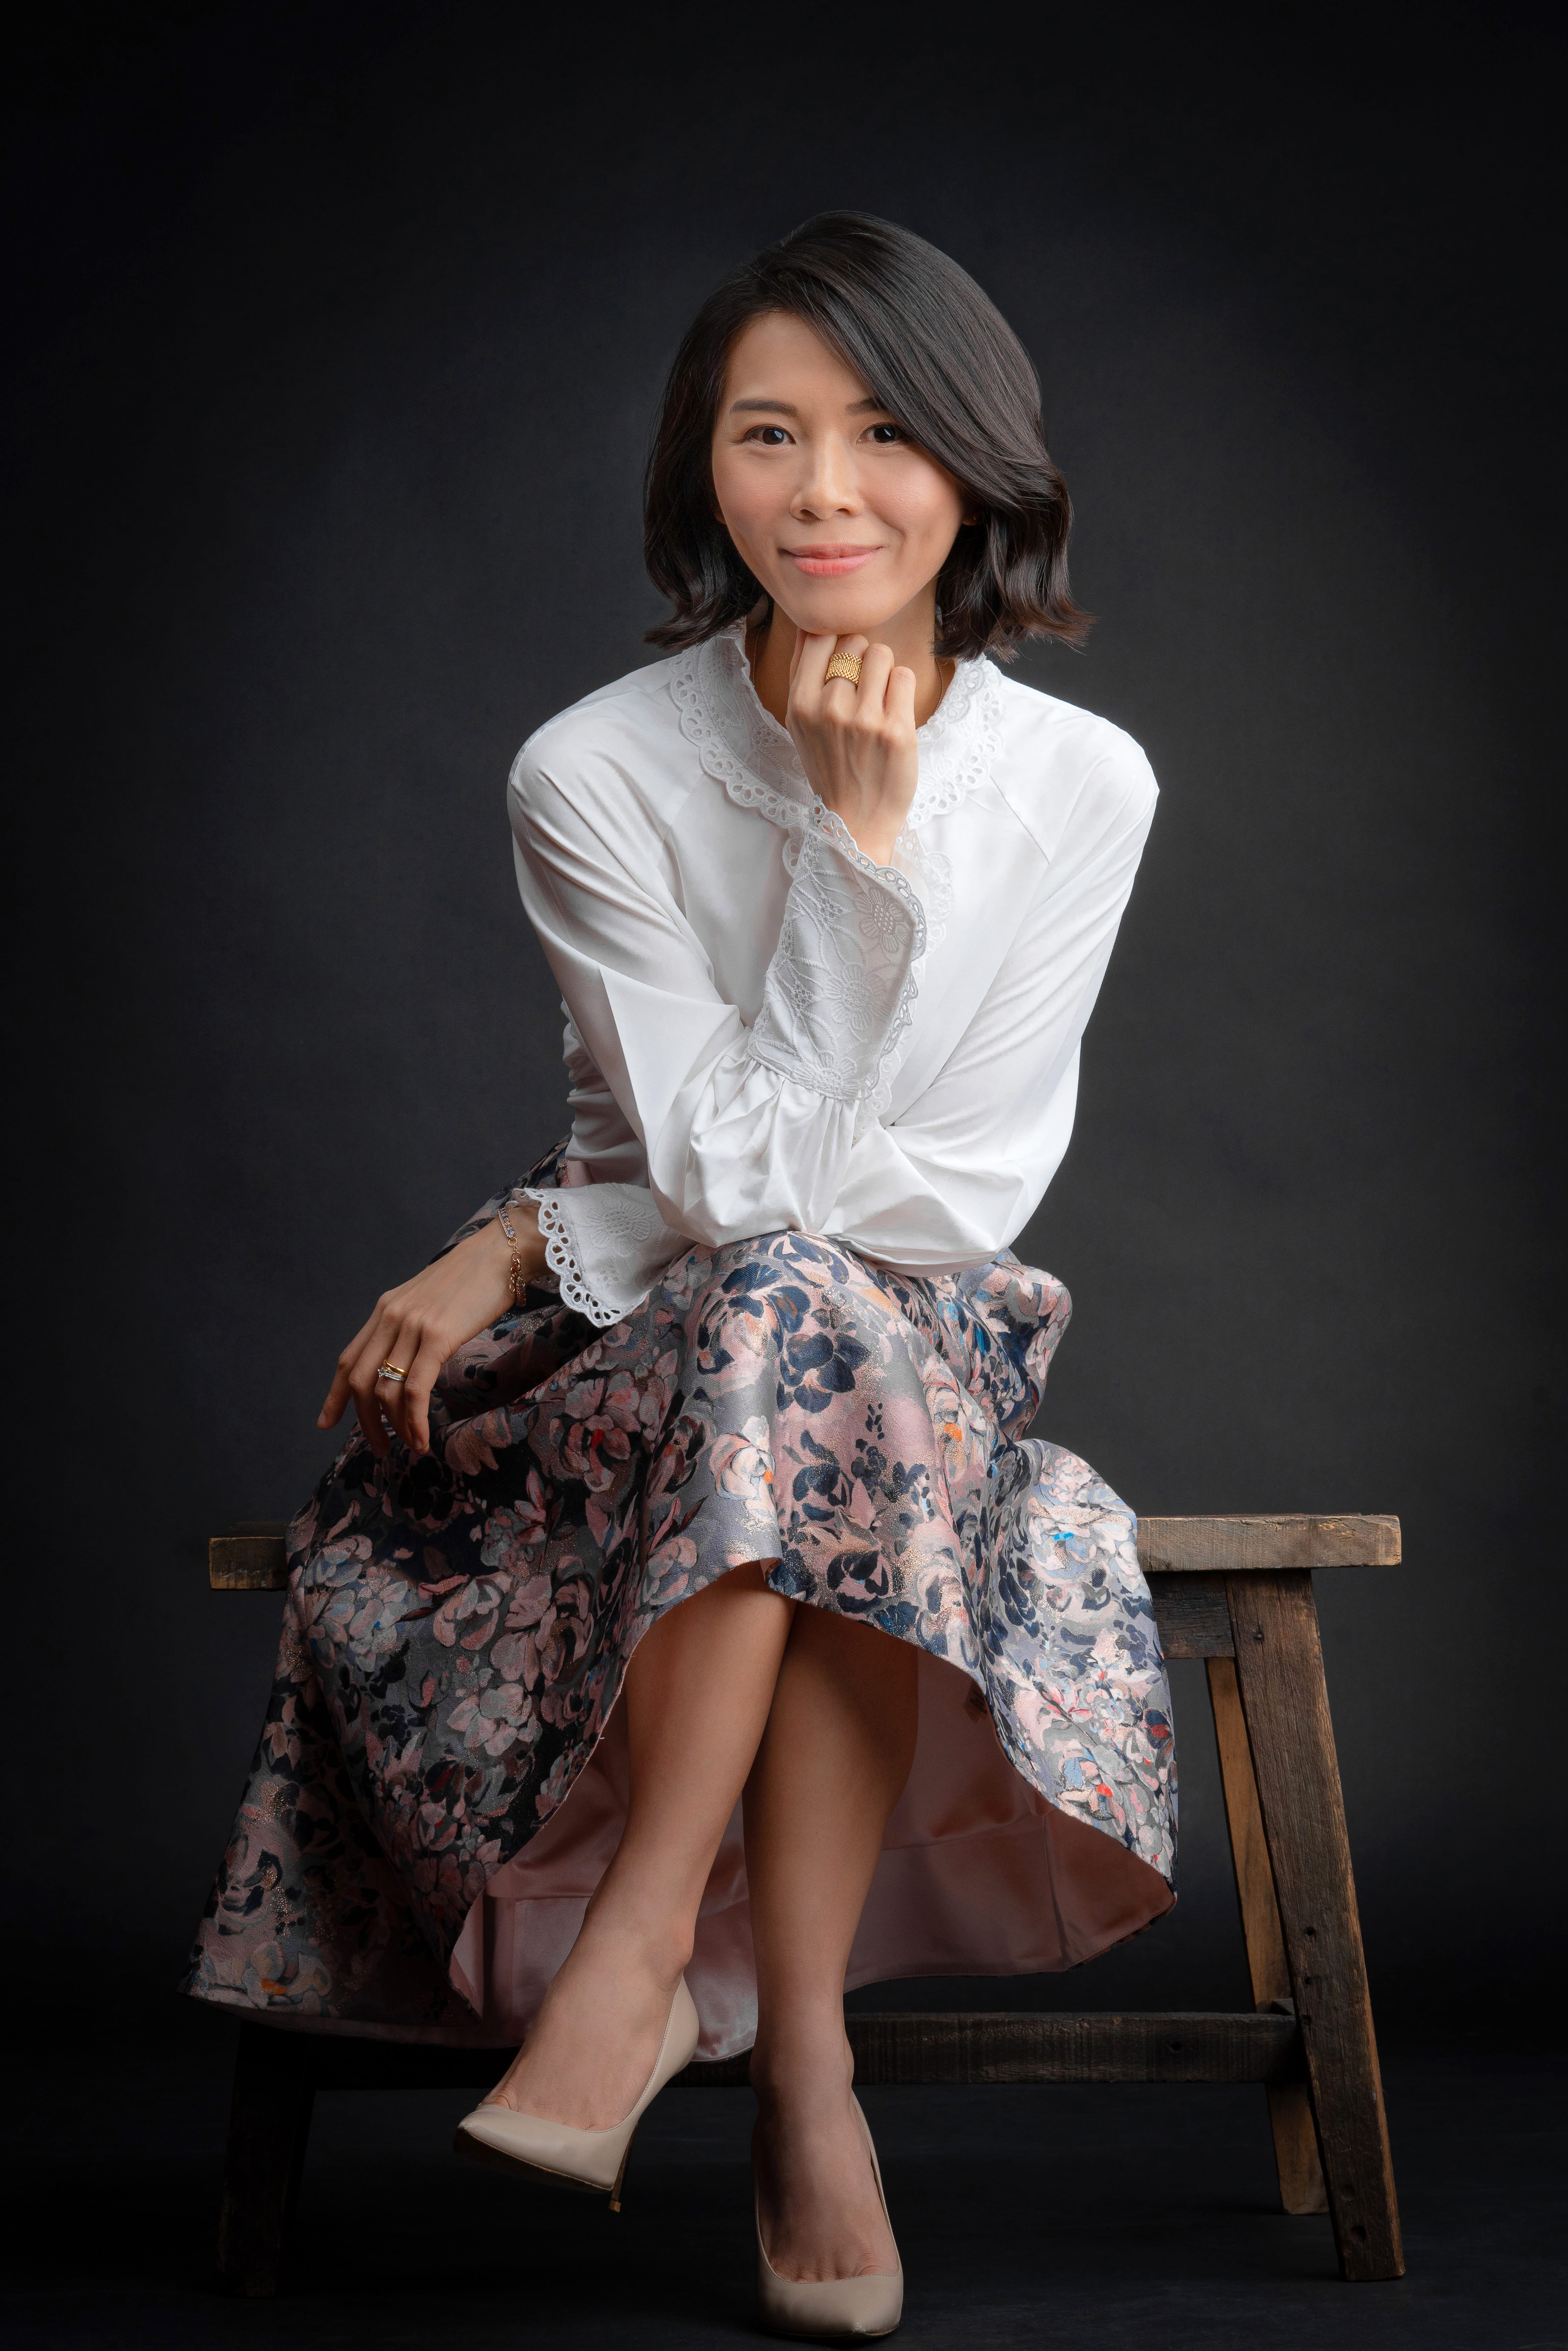 A woman in a white blouse and patterned skirt sitting on a wooden chair posing for a headshot against a black studio background during a corporate photoshoot in Singapore Credit: White Room Studio